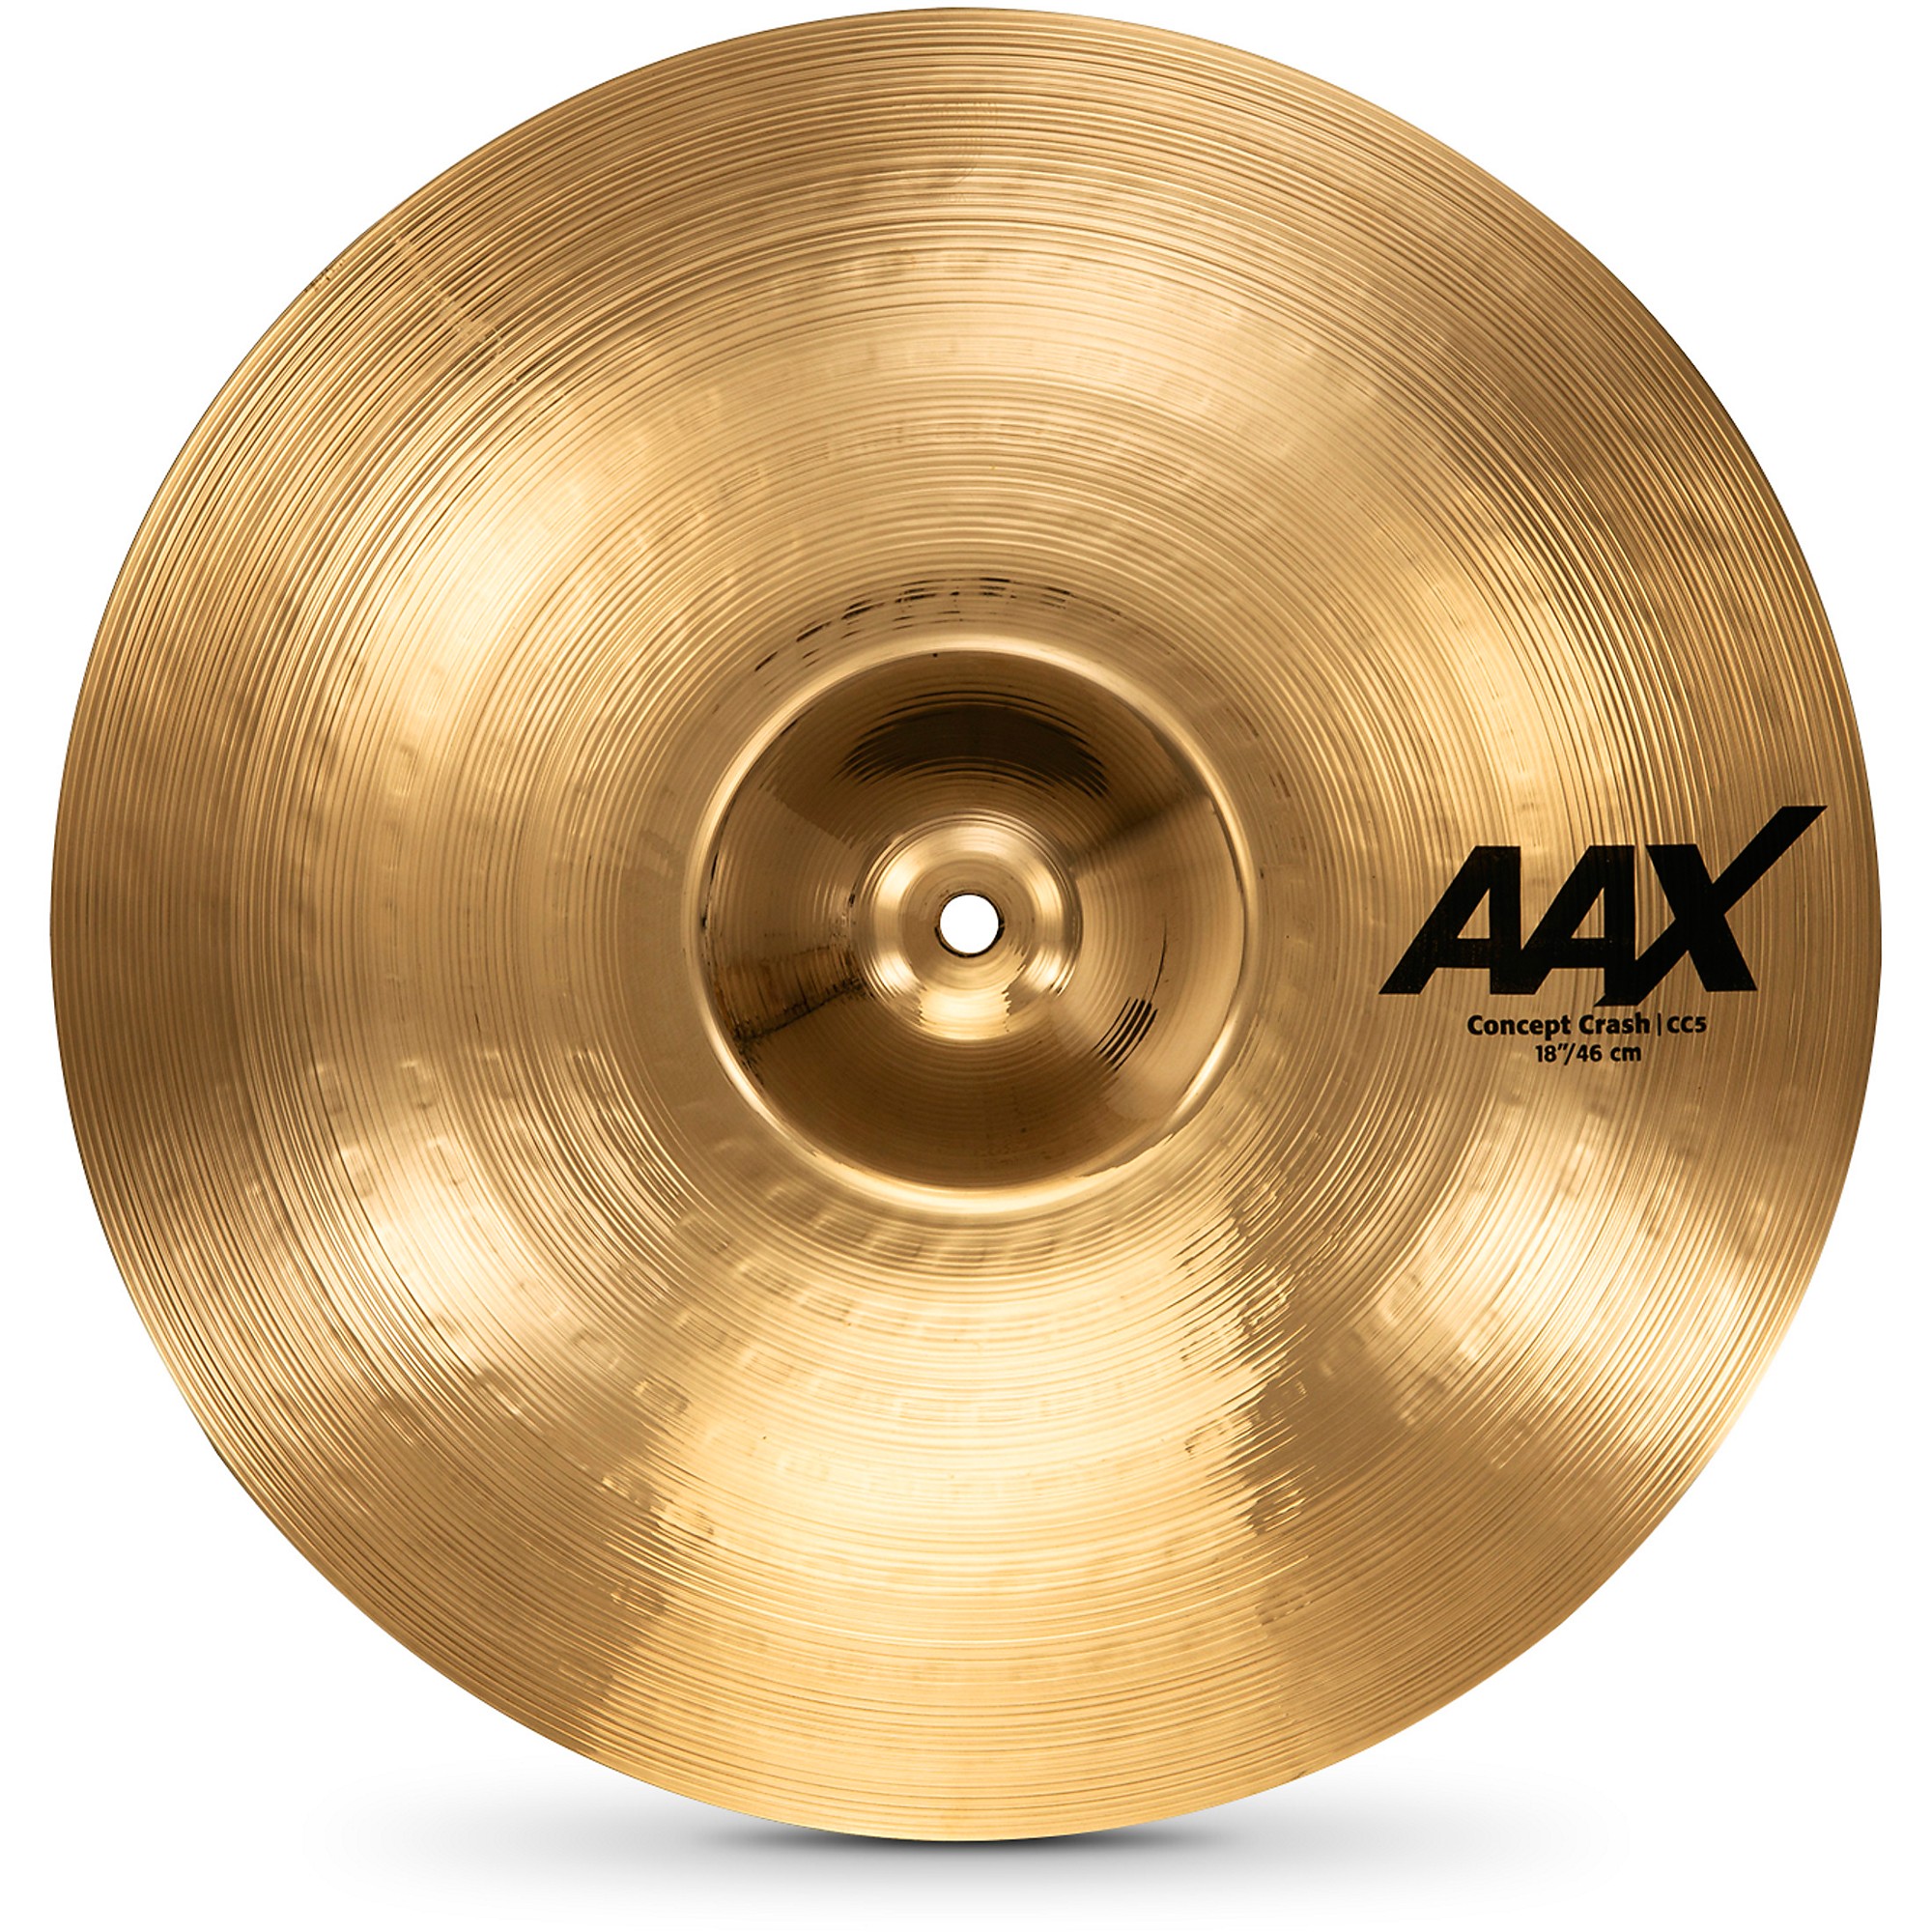 SABIAN AAX Limited-Edition Concept Crash 18 in. | Guitar Center